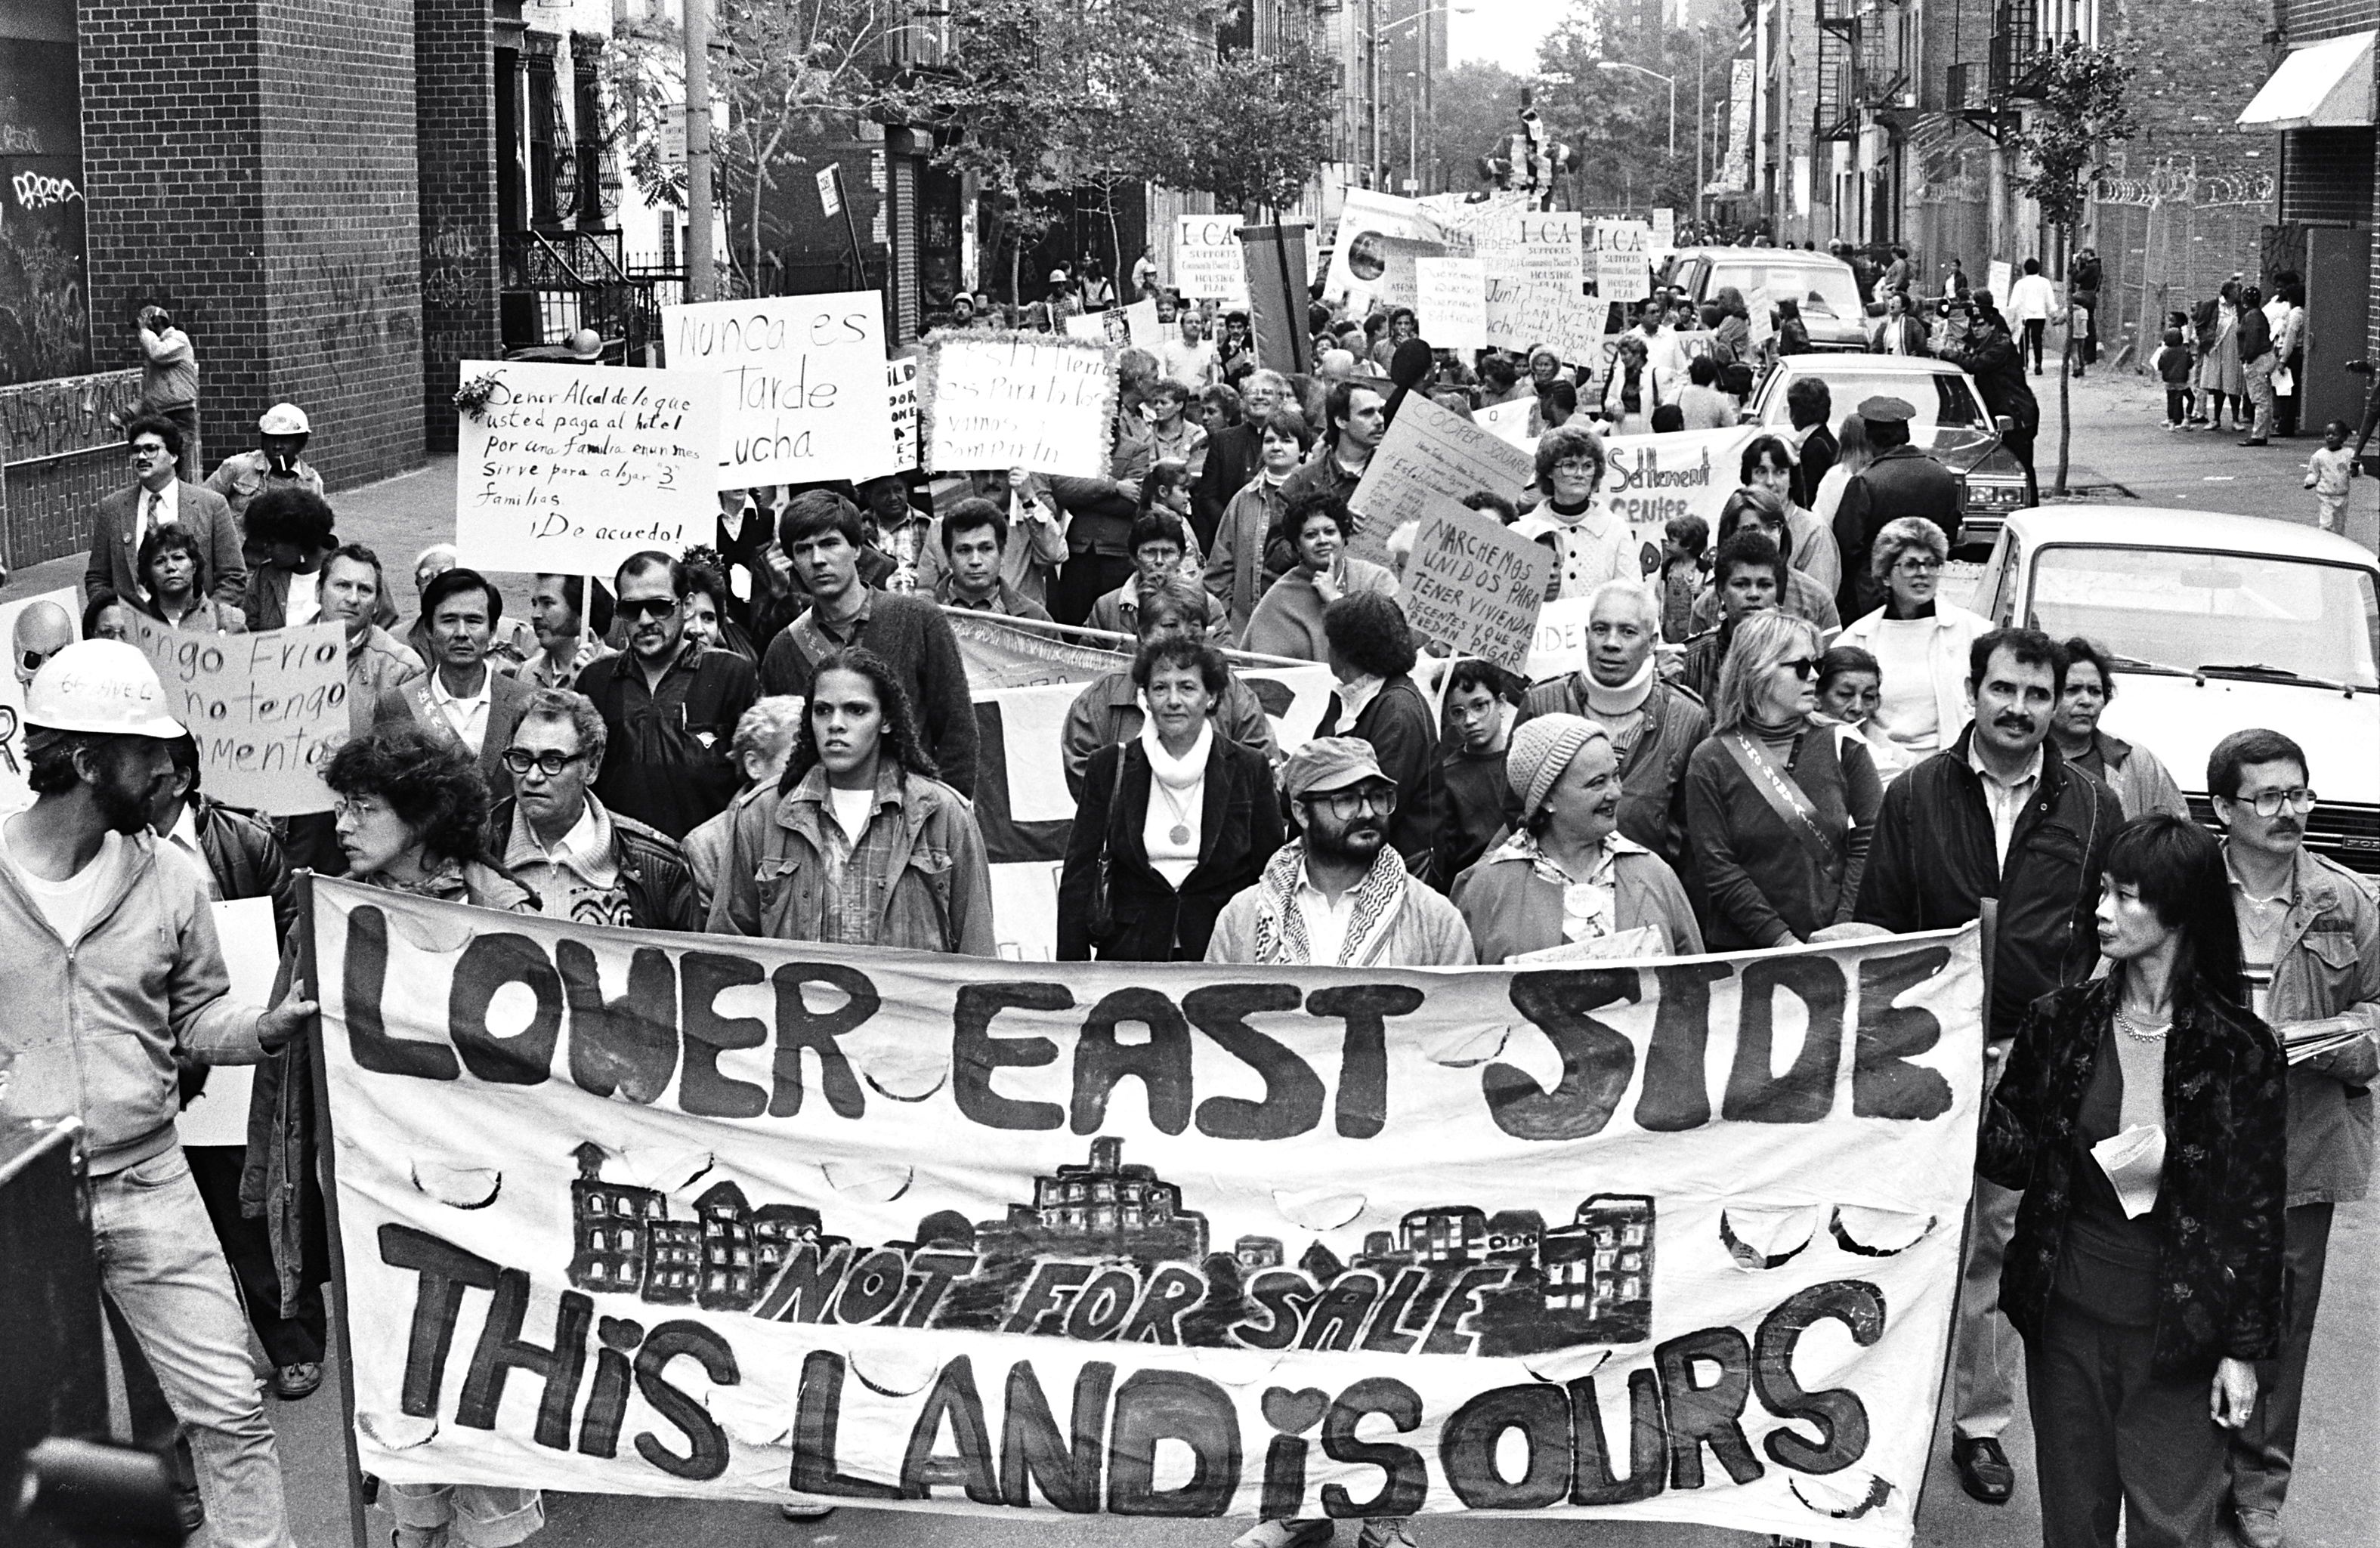 A black and white photo of a group of adults marching down a Lower East Side street. The people in the front hold a banner that says: "Lower East Side. This Land is Ours."